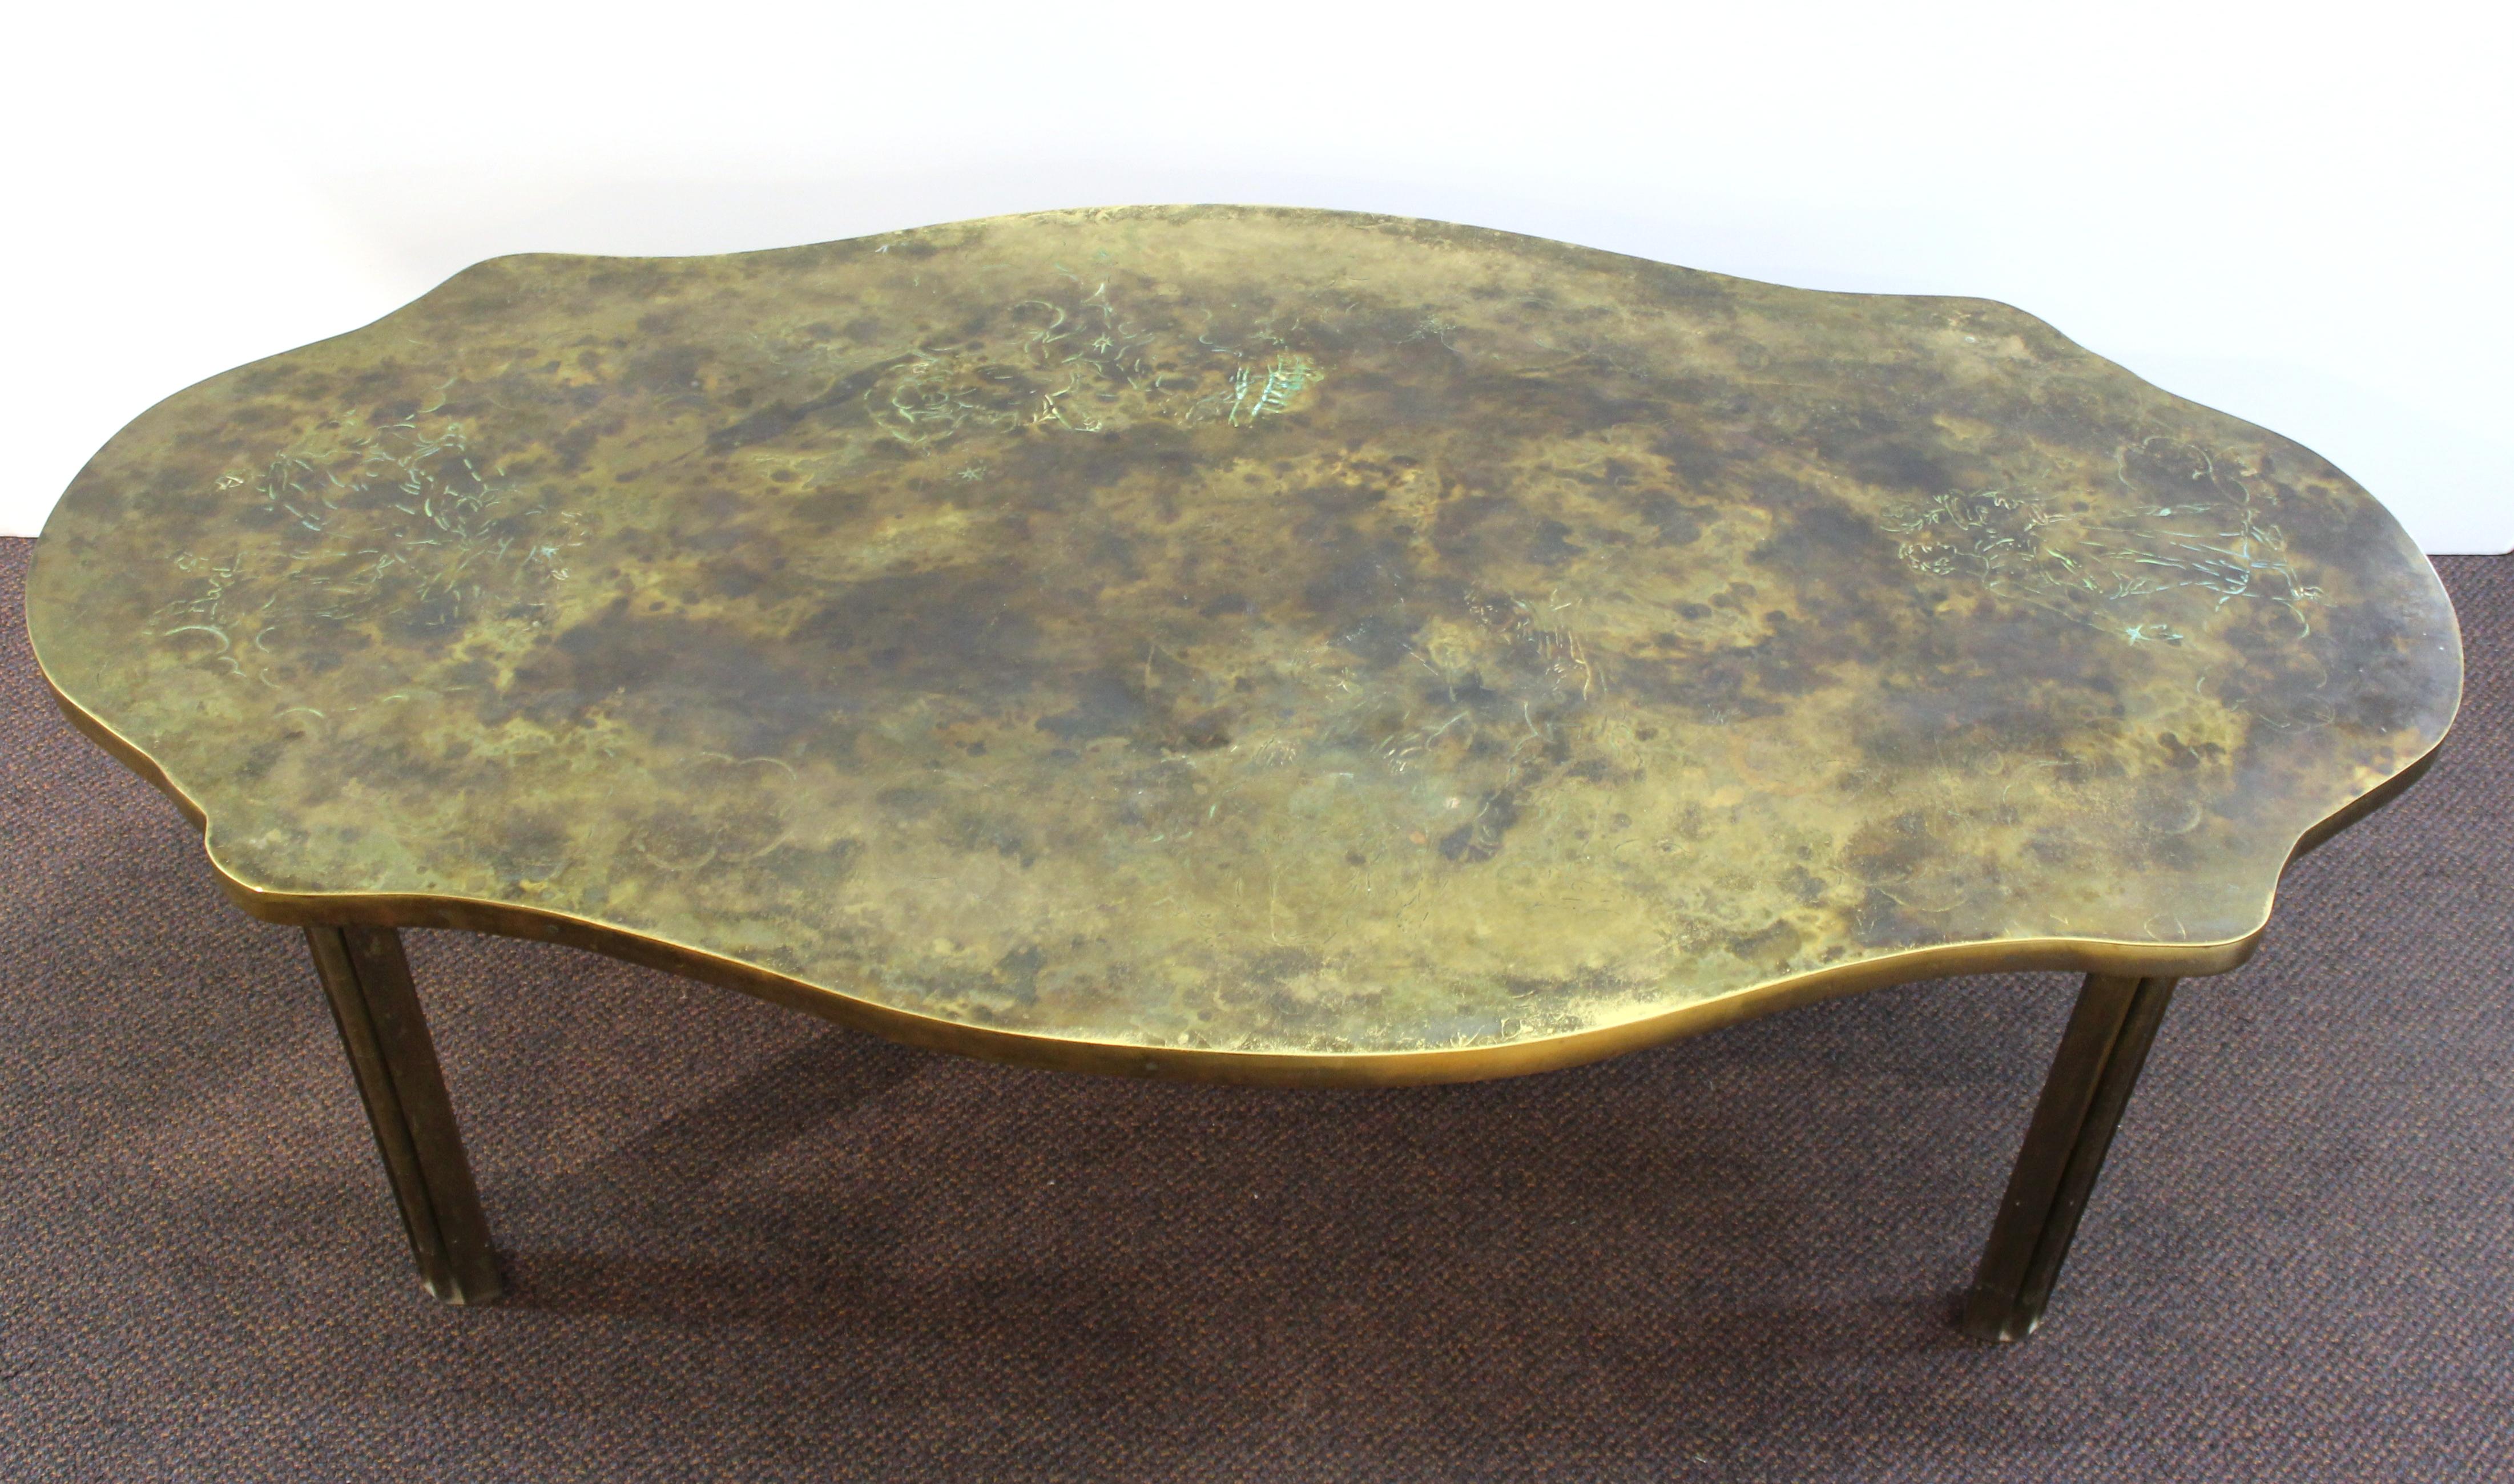 American Mid-Century Modern oval coffee table made in etched bronze by designers Philip and Kelvin LaVerne during the mid-20th century. The piece features etched muses of classical inspiration on the top surface and has an etched signature on one of